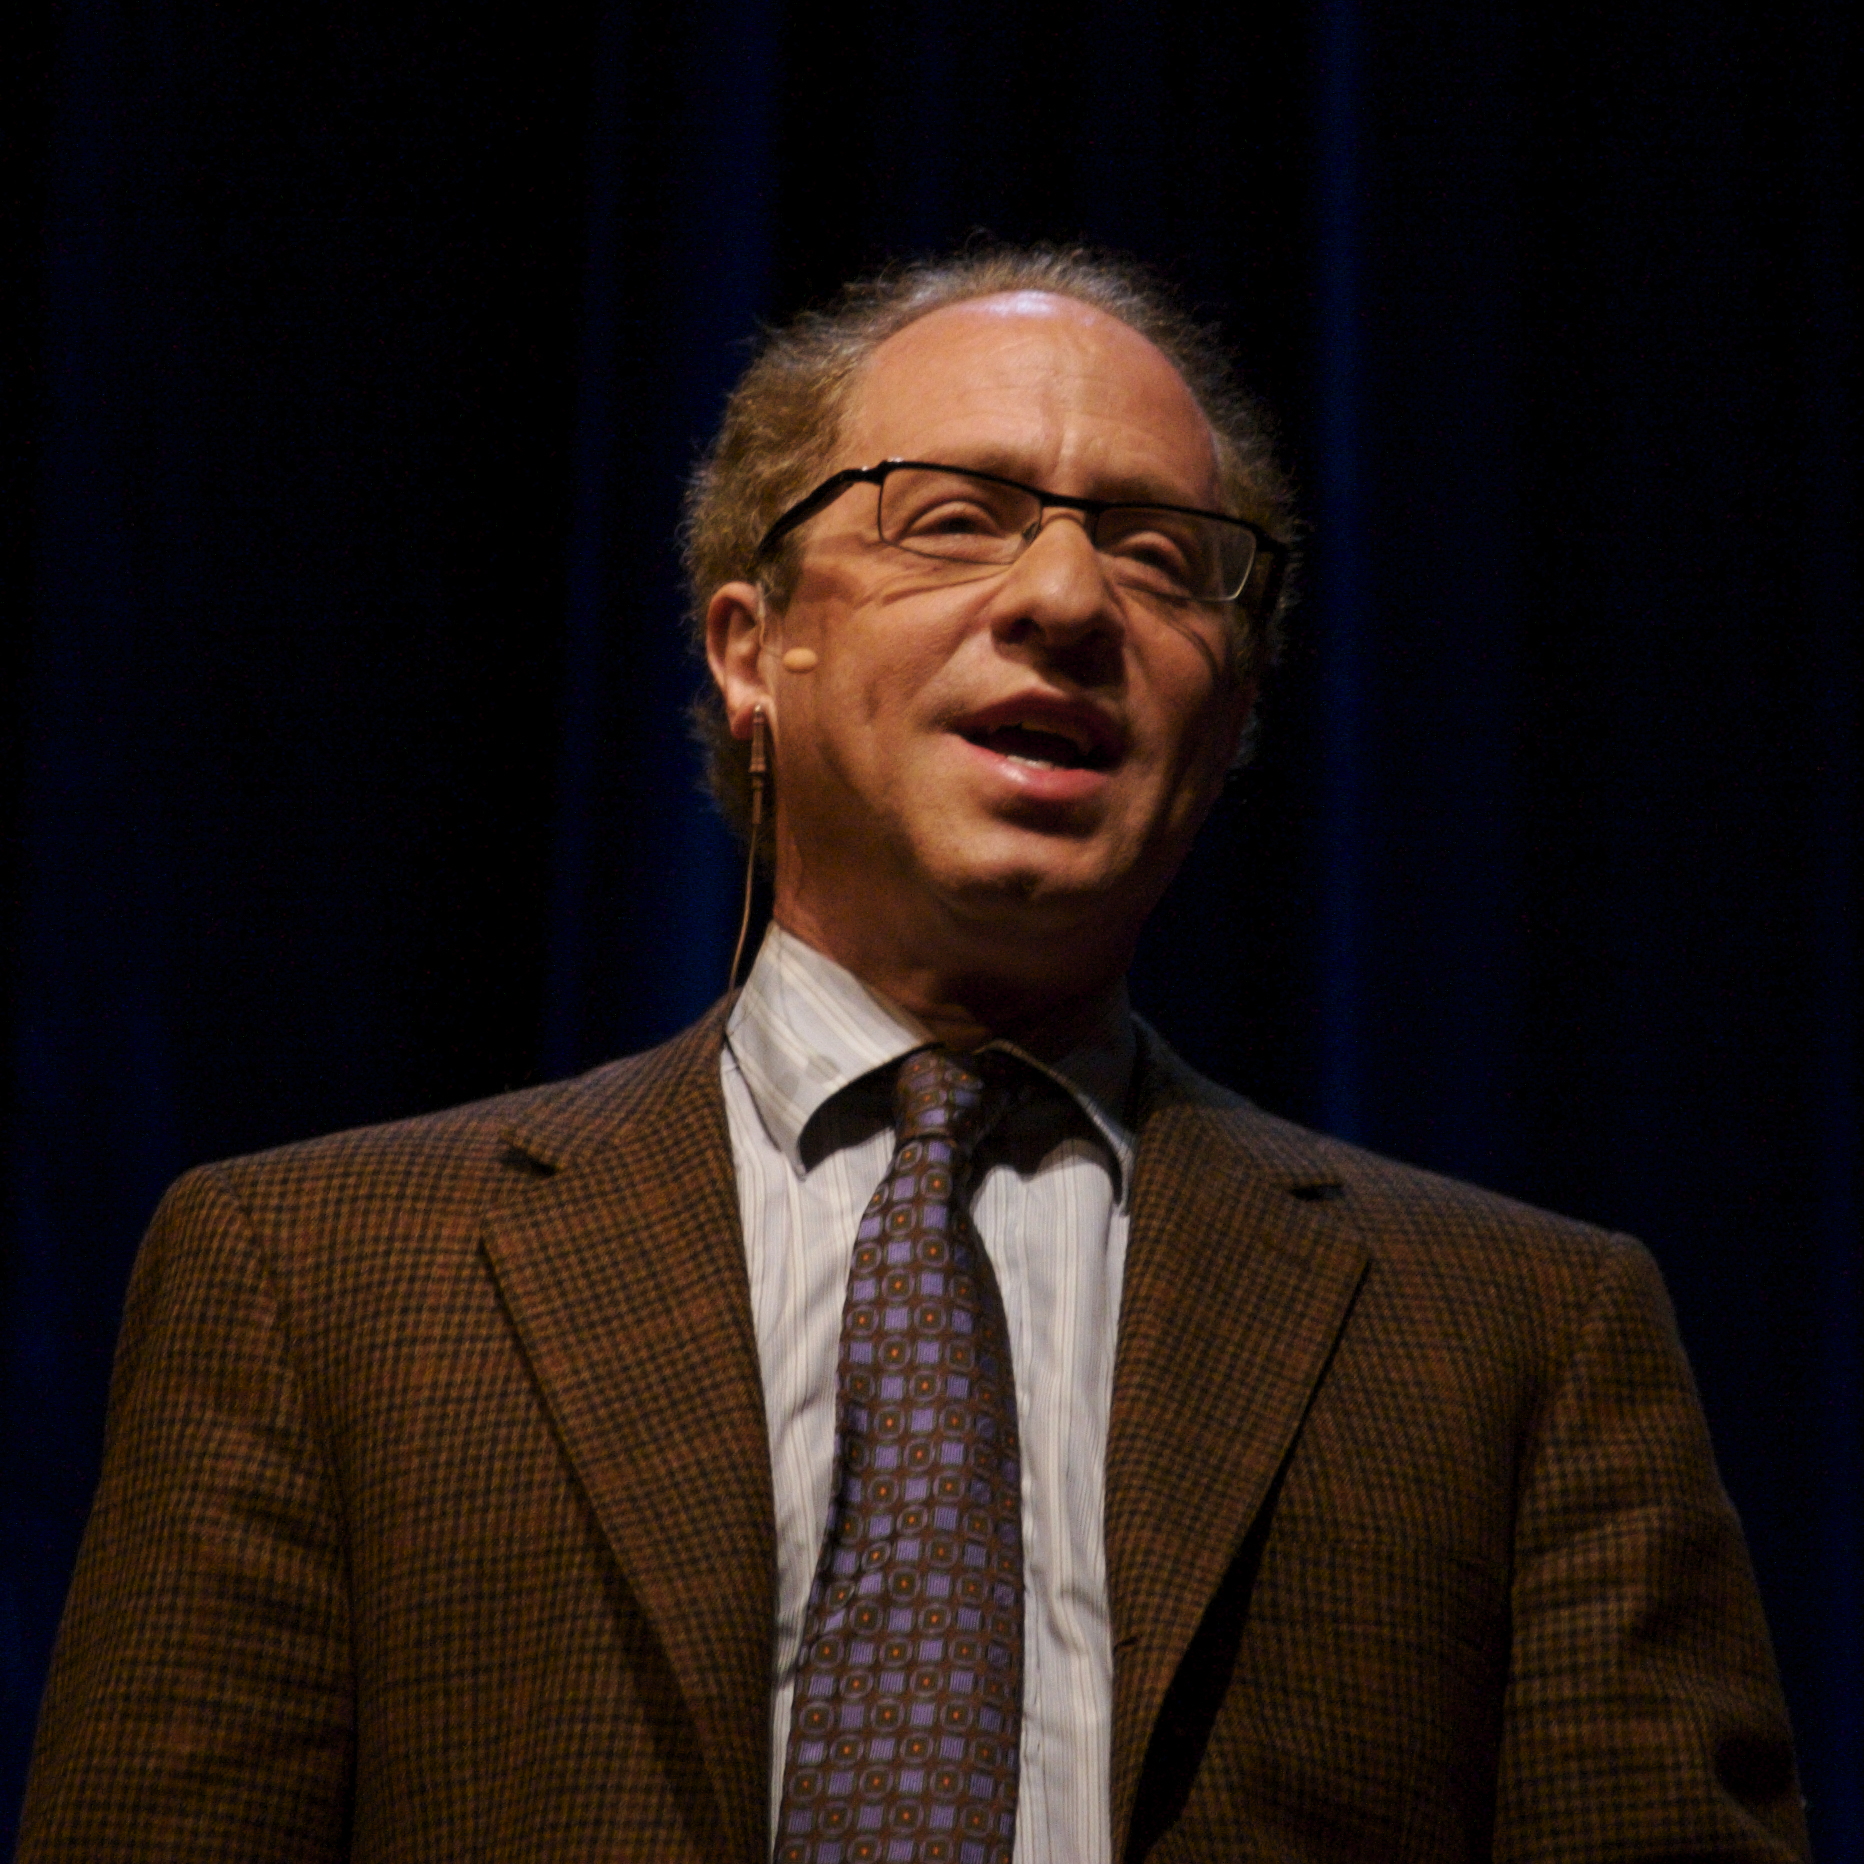 Dr Ray Kurzweil in a summit at stanford